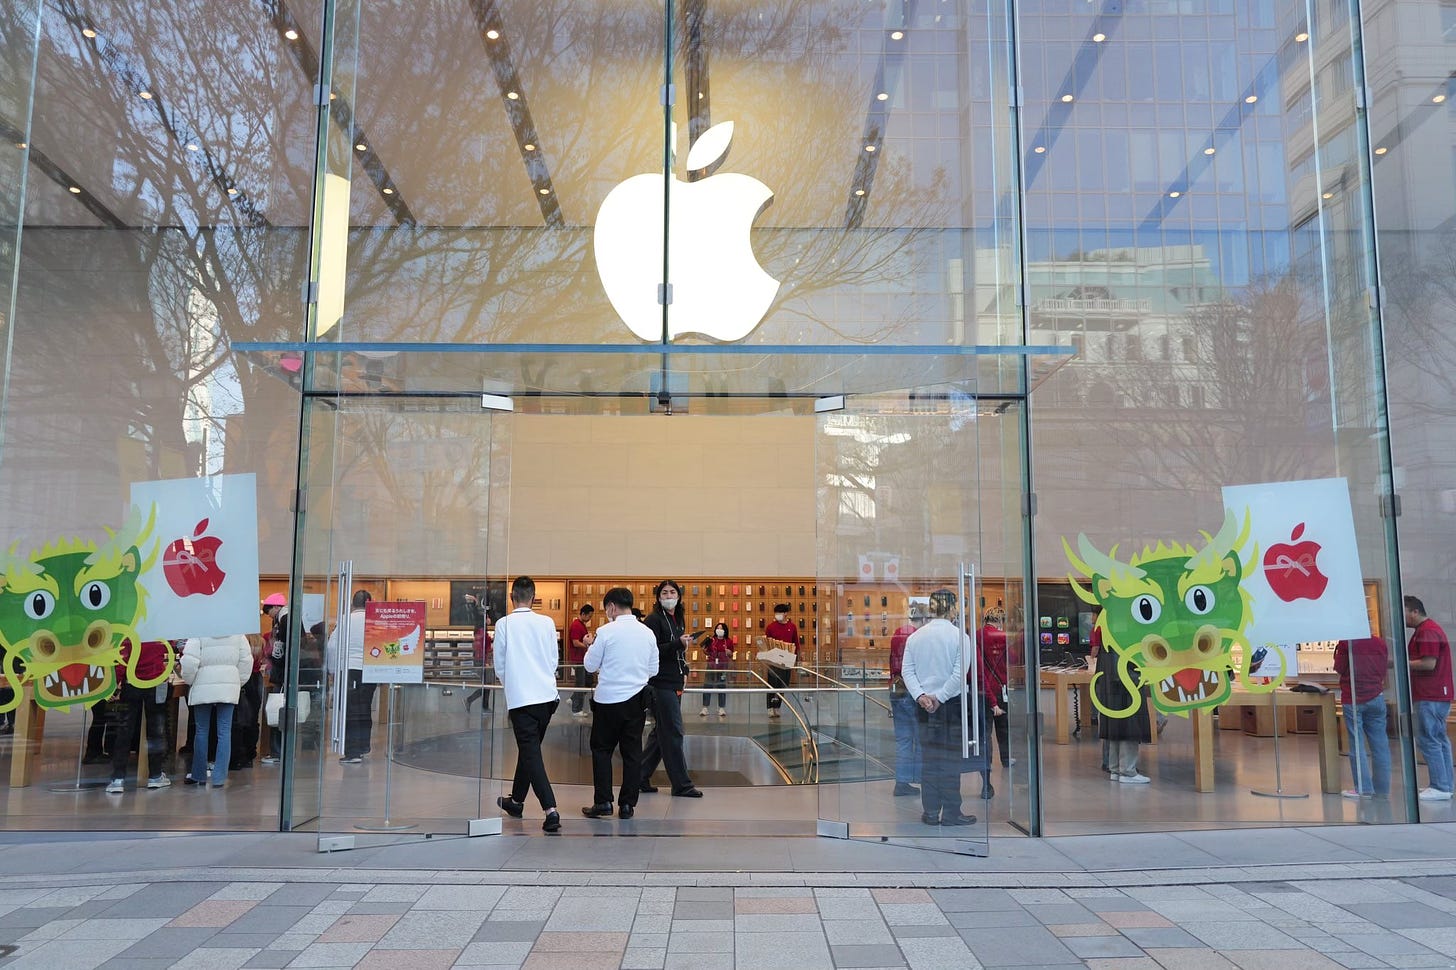 The windows of Apple Omotesando are decorated with year of the dragon vinyl decals.